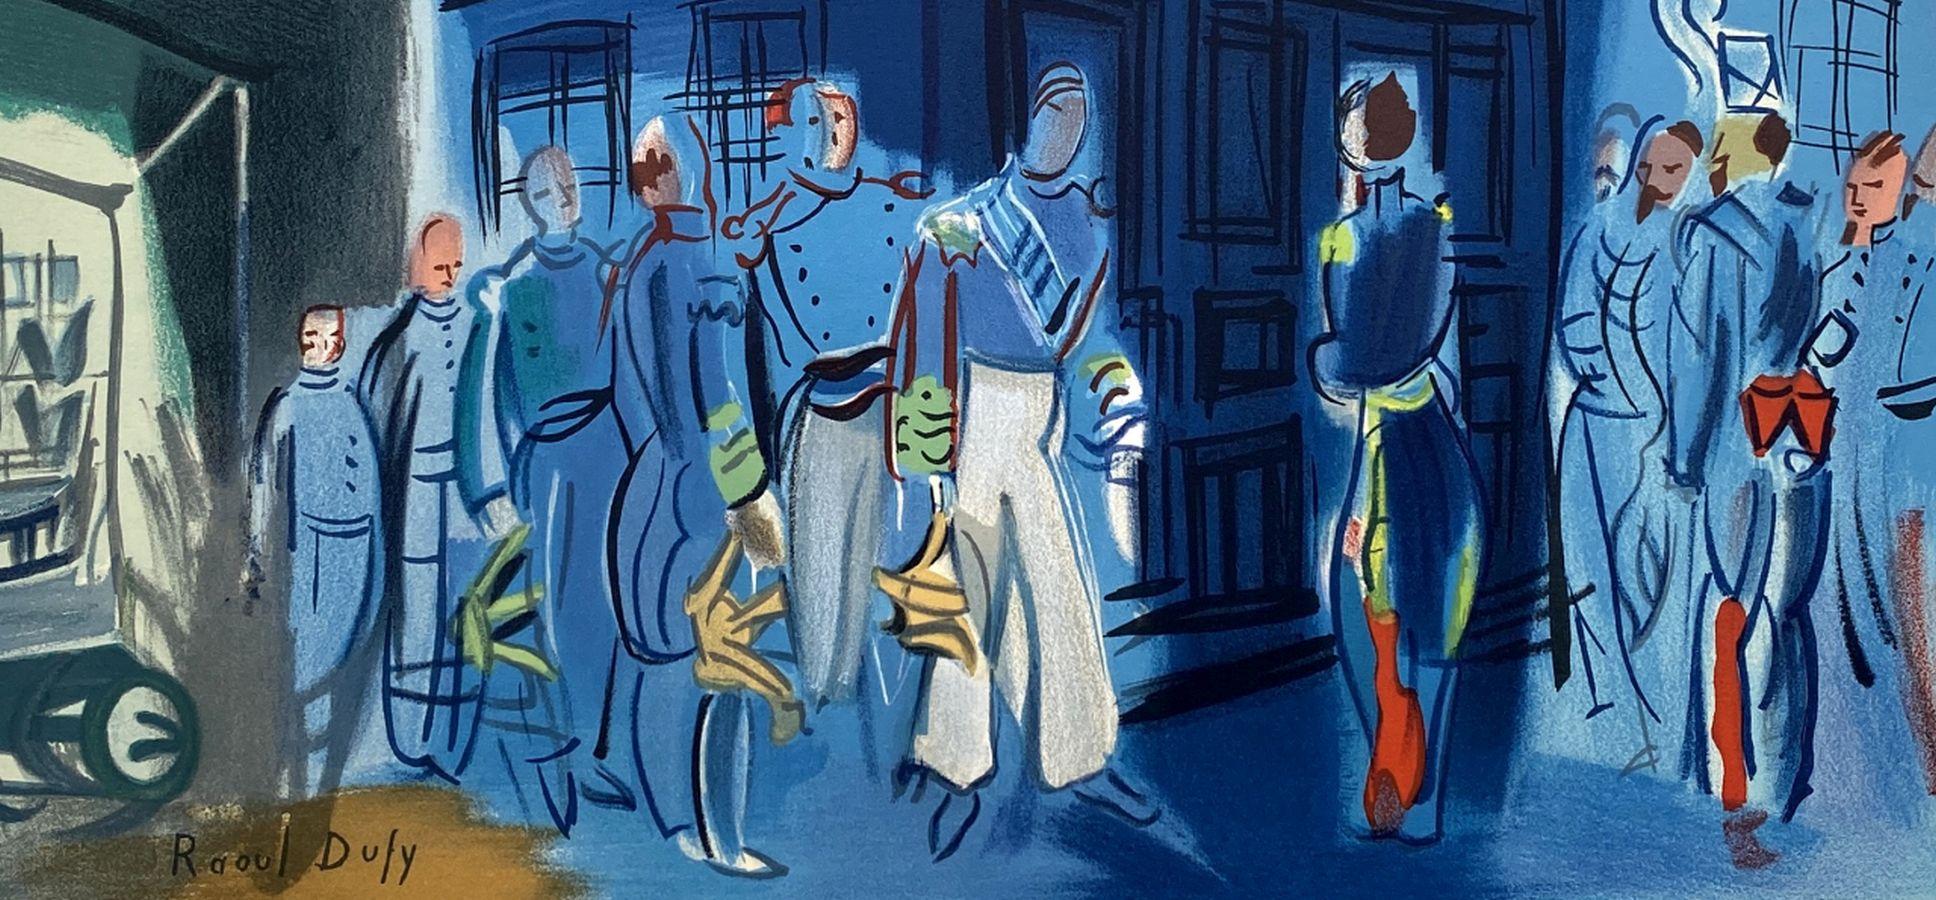 Admiral and Officers - Lithograph Signed in the Plate (Mourlot) - Gray Figurative Print by Raoul Dufy